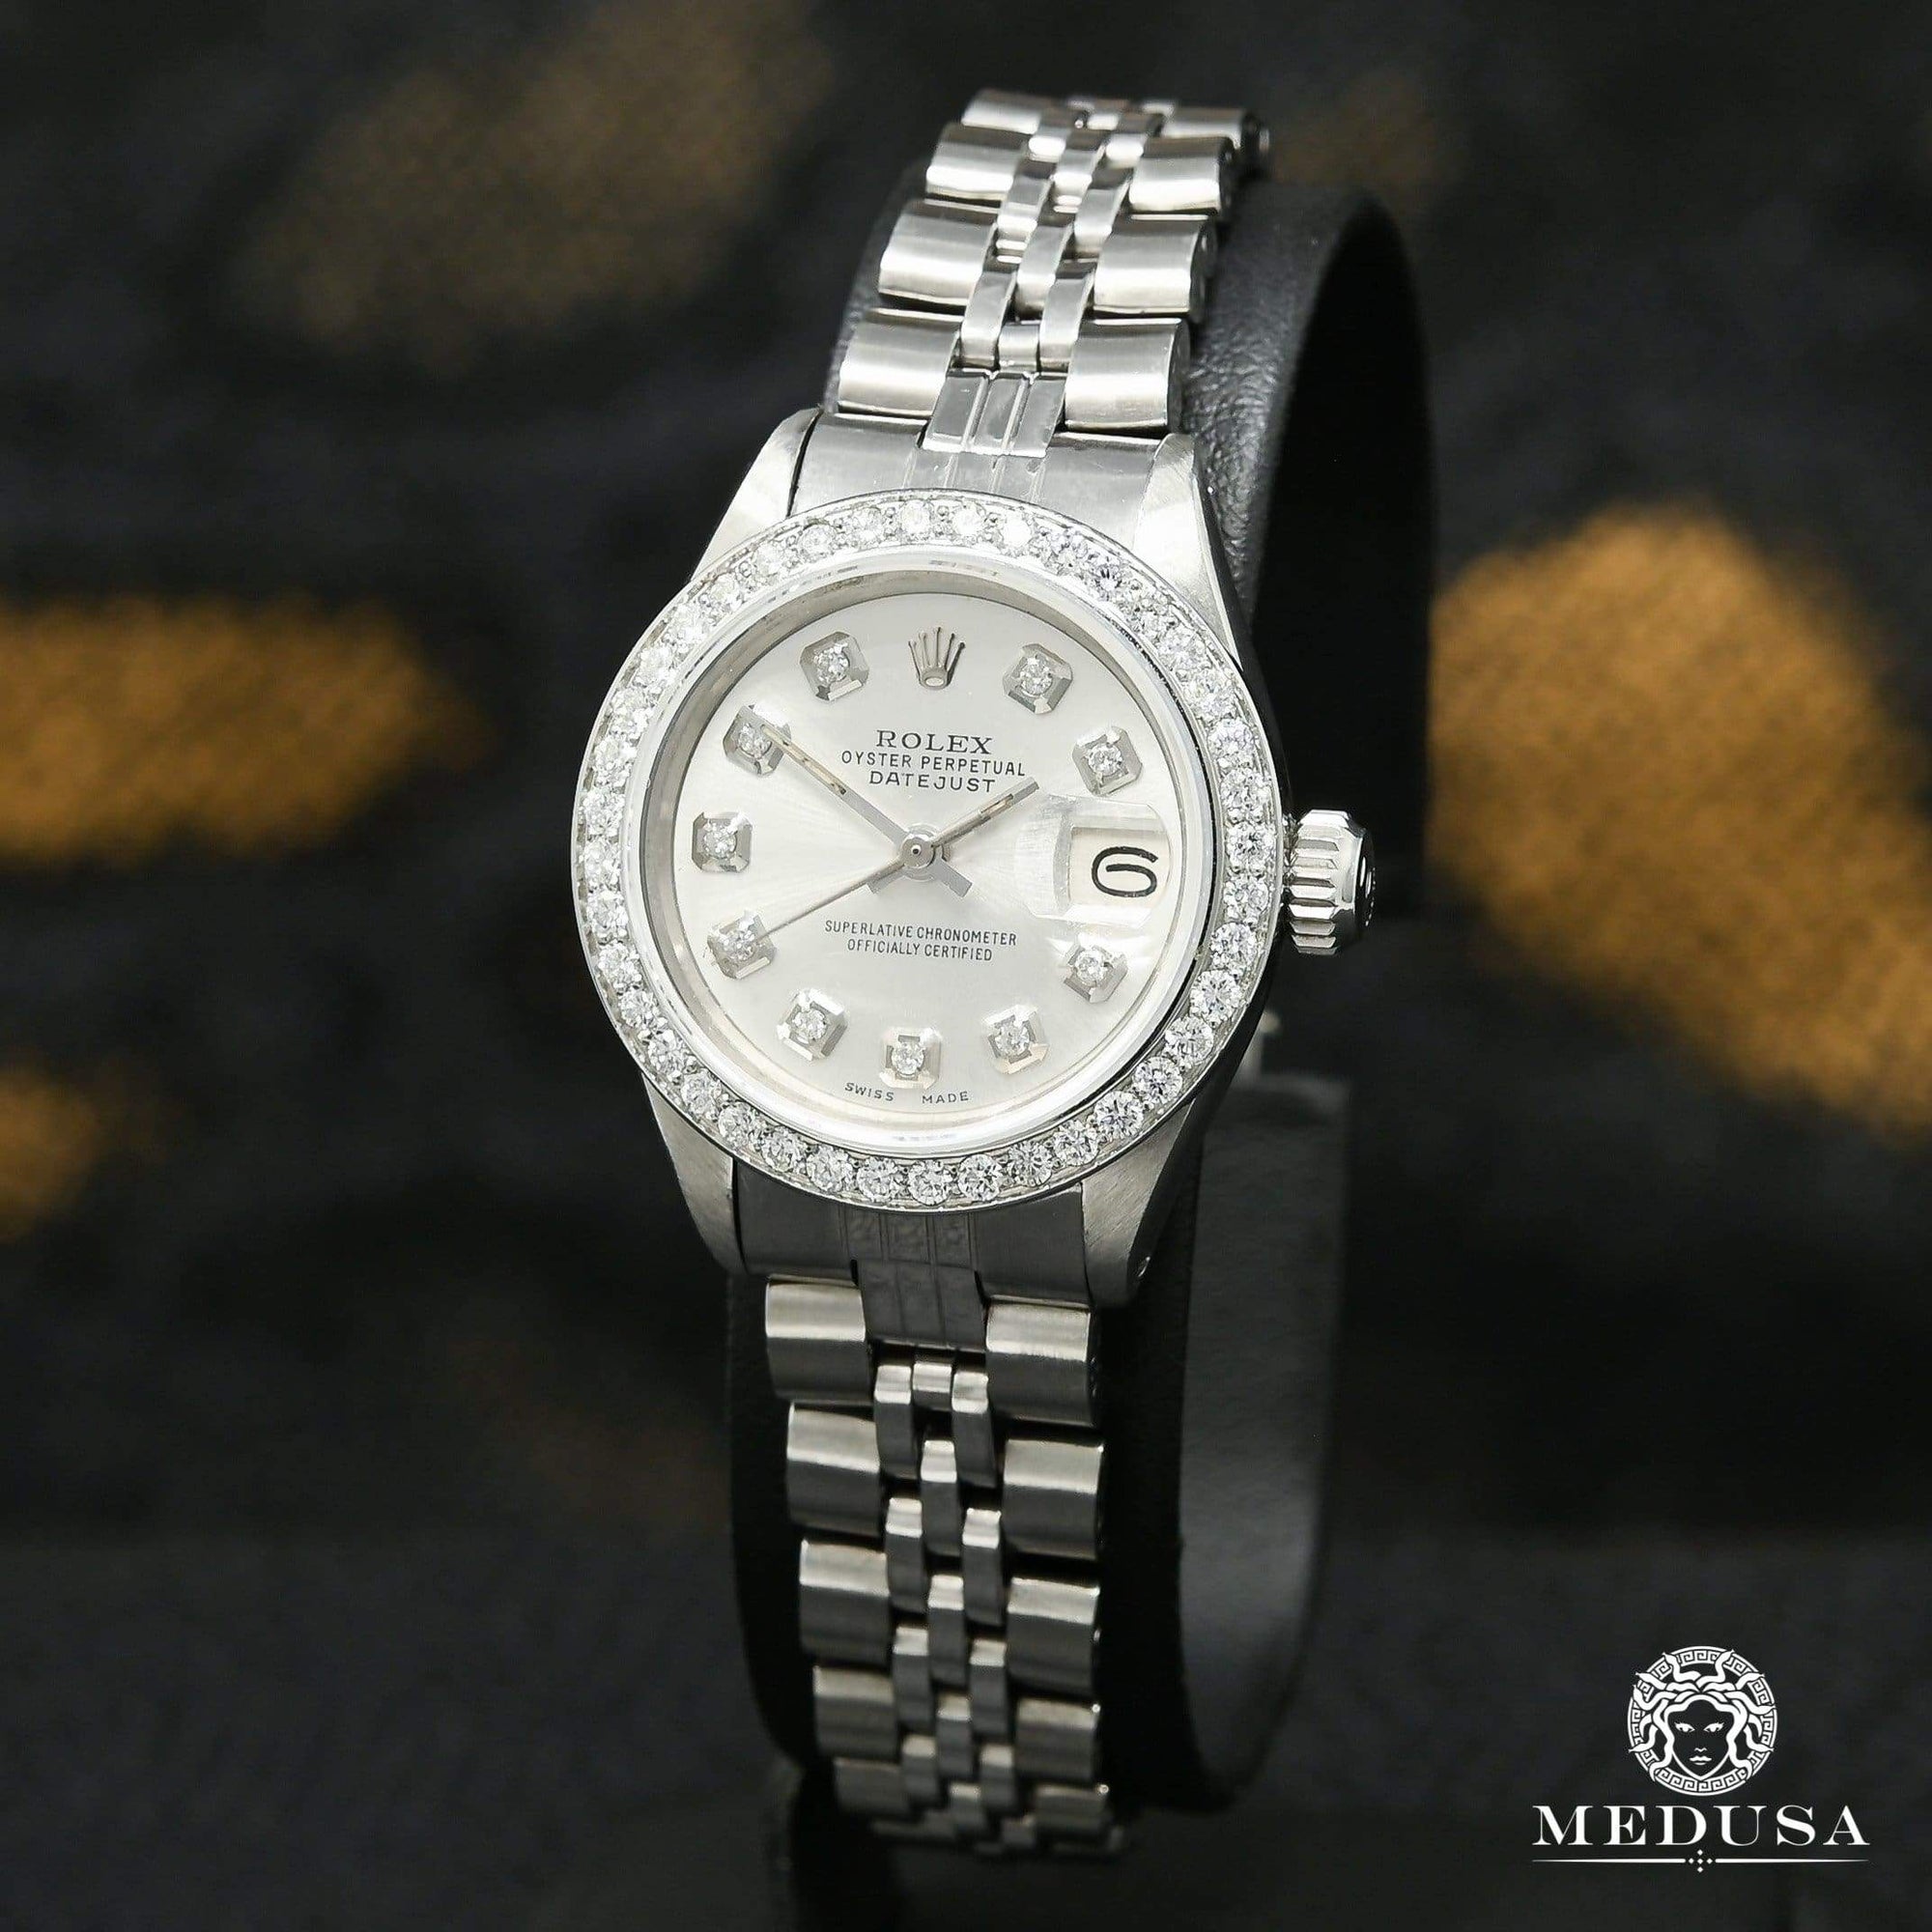 Montre Rolex | Montre Femme Rolex Datejust 26mm - Silver Stainless Stainless